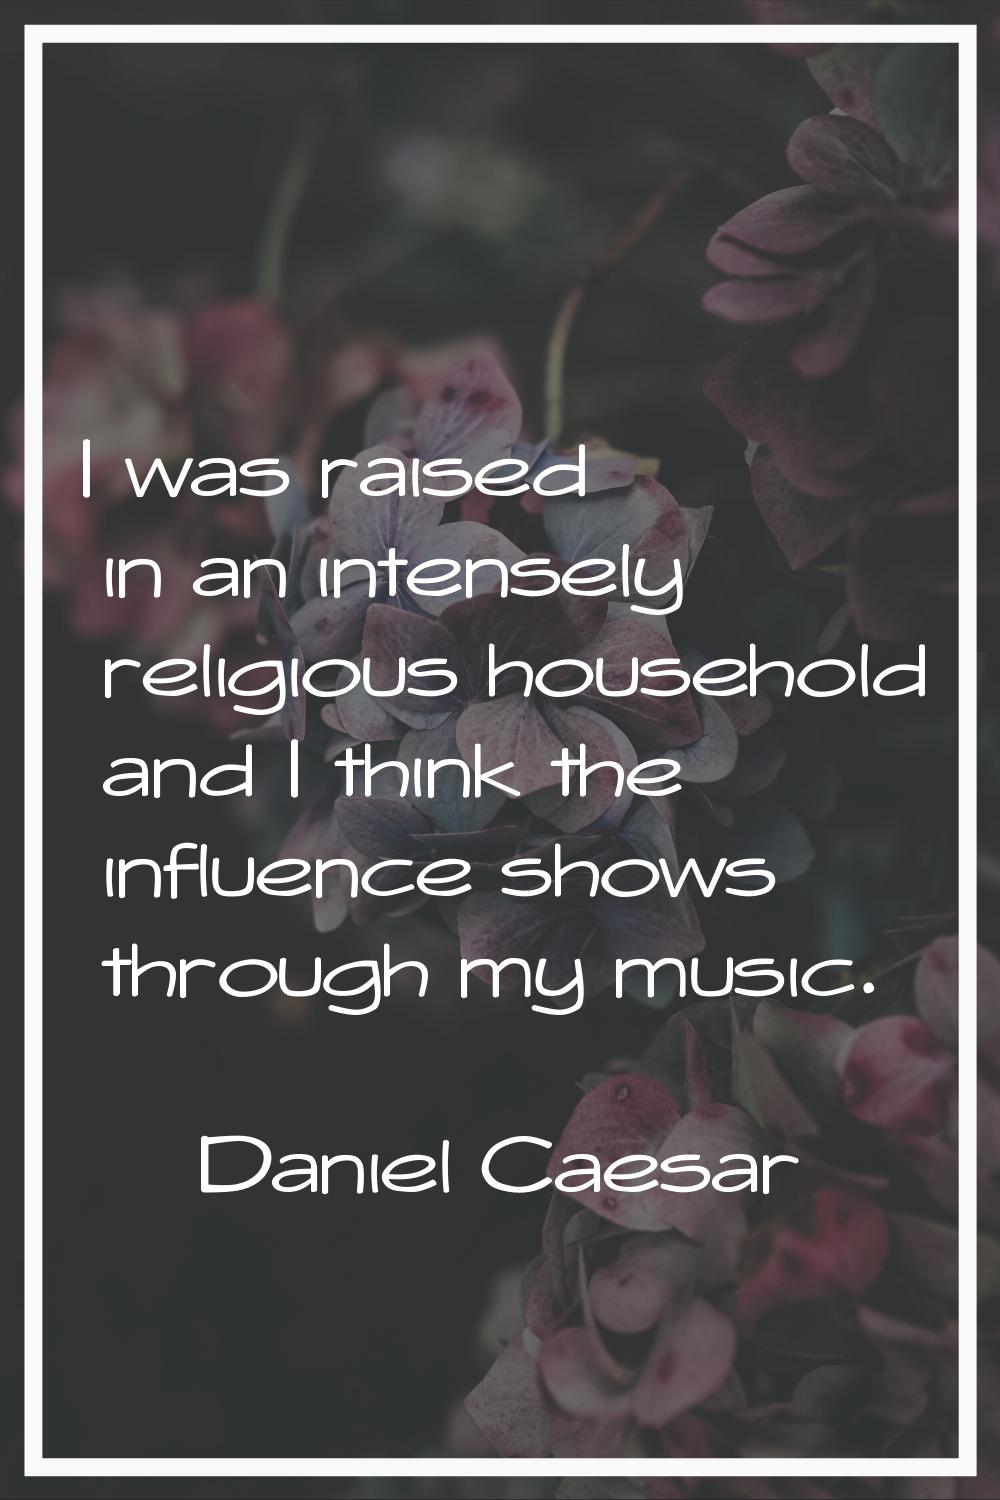 I was raised in an intensely religious household and I think the influence shows through my music.